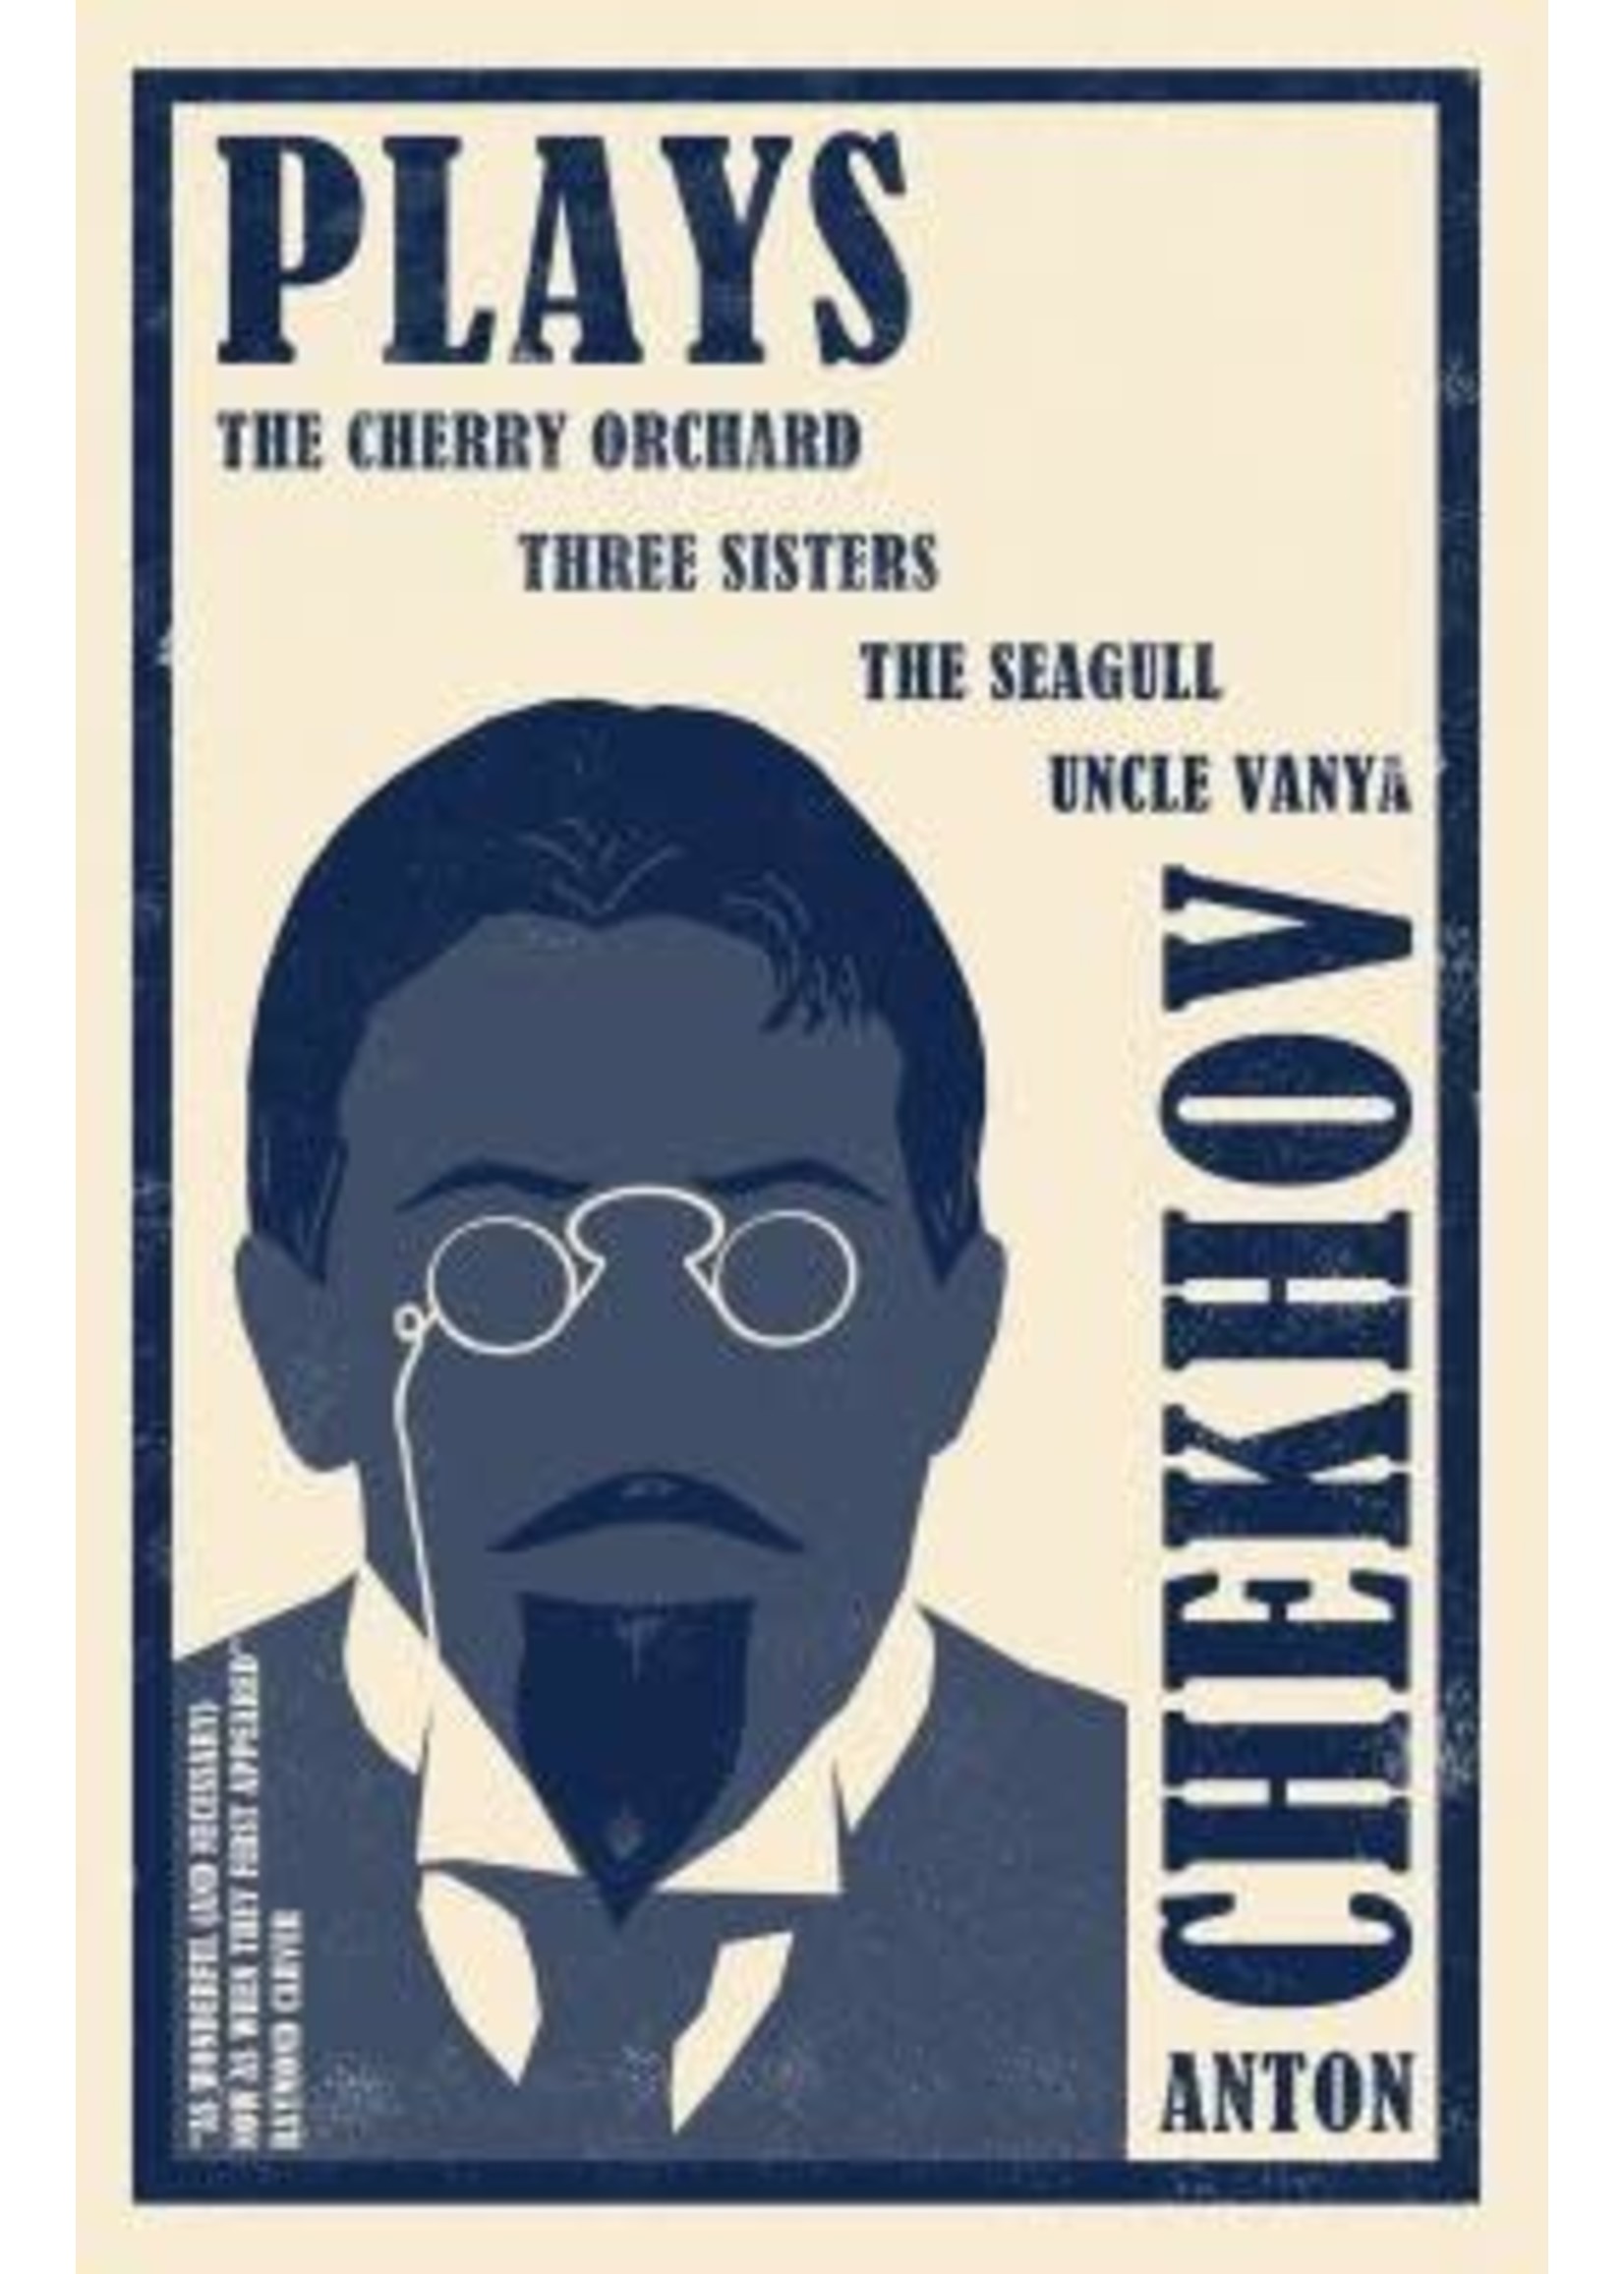 Plays: The Cherry Orchard, Three Sisters, The Seagull and Uncle Vanya by Anton Chekhov, Hugh Aplin